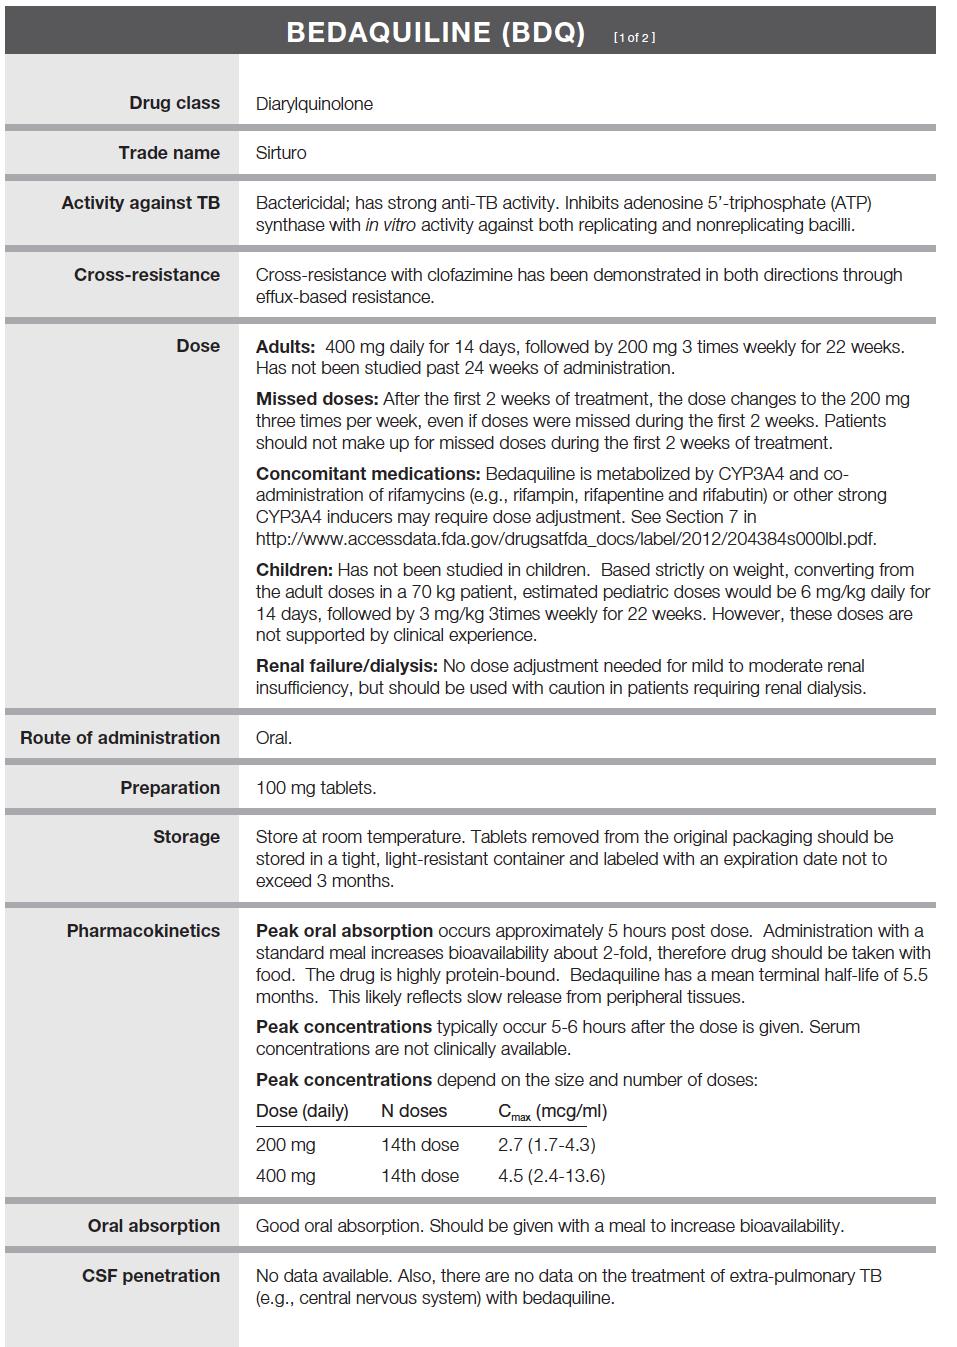 Medication Fact Sheets Drug class/trade name Activity against TB Cross-resistance Dose (adult, peds, renal) Route of administration Preparation/storage